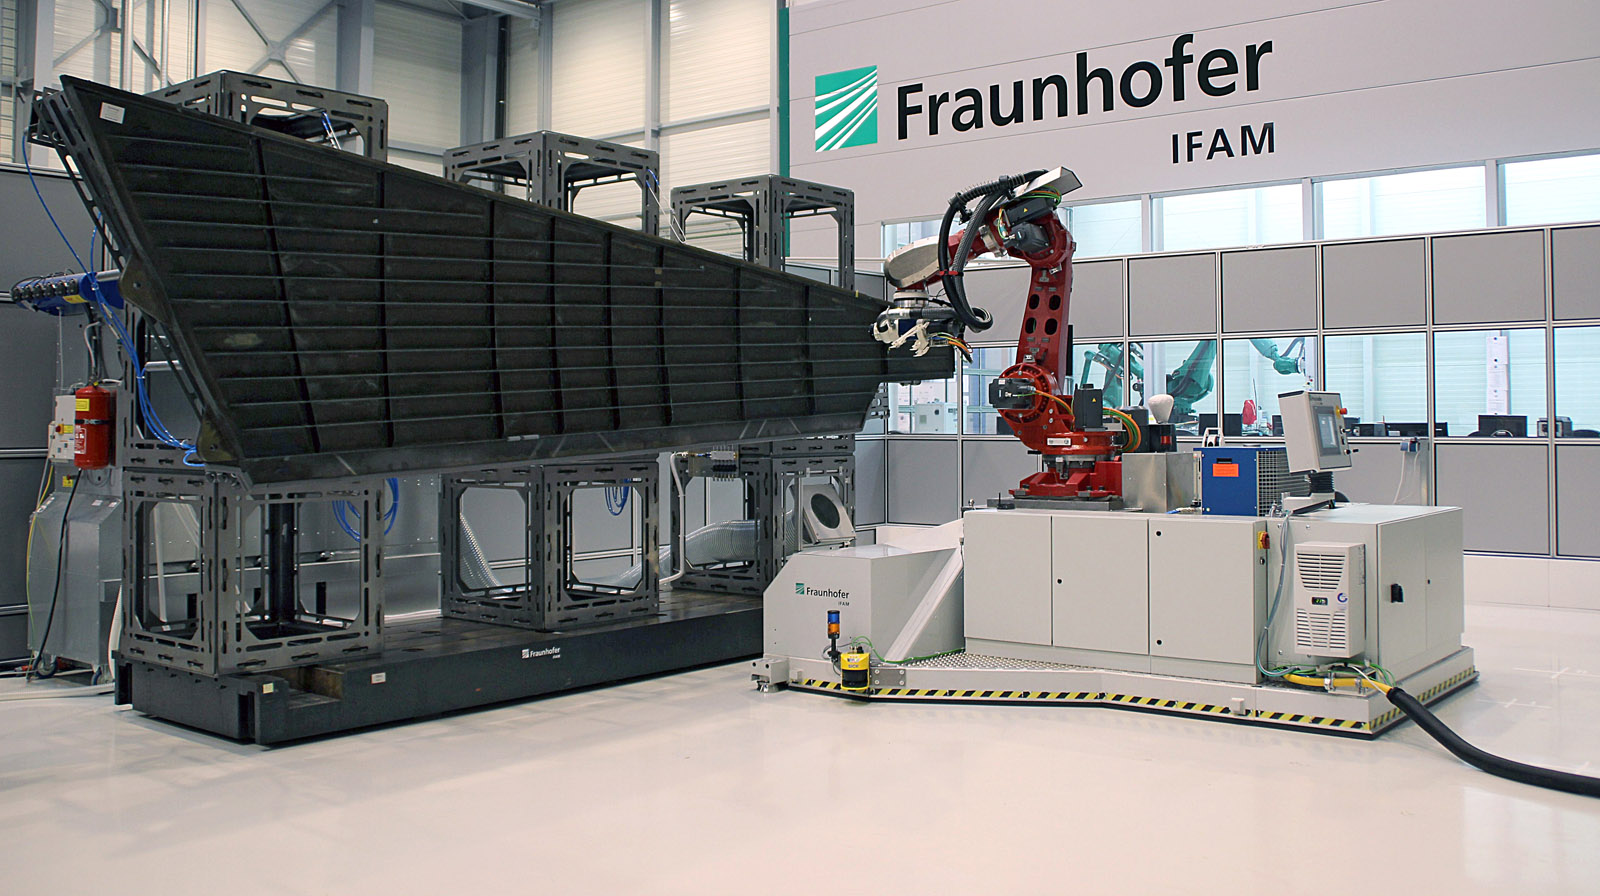 The mobile robot is processing the tail-fin of an Airbus 320 aircraft.